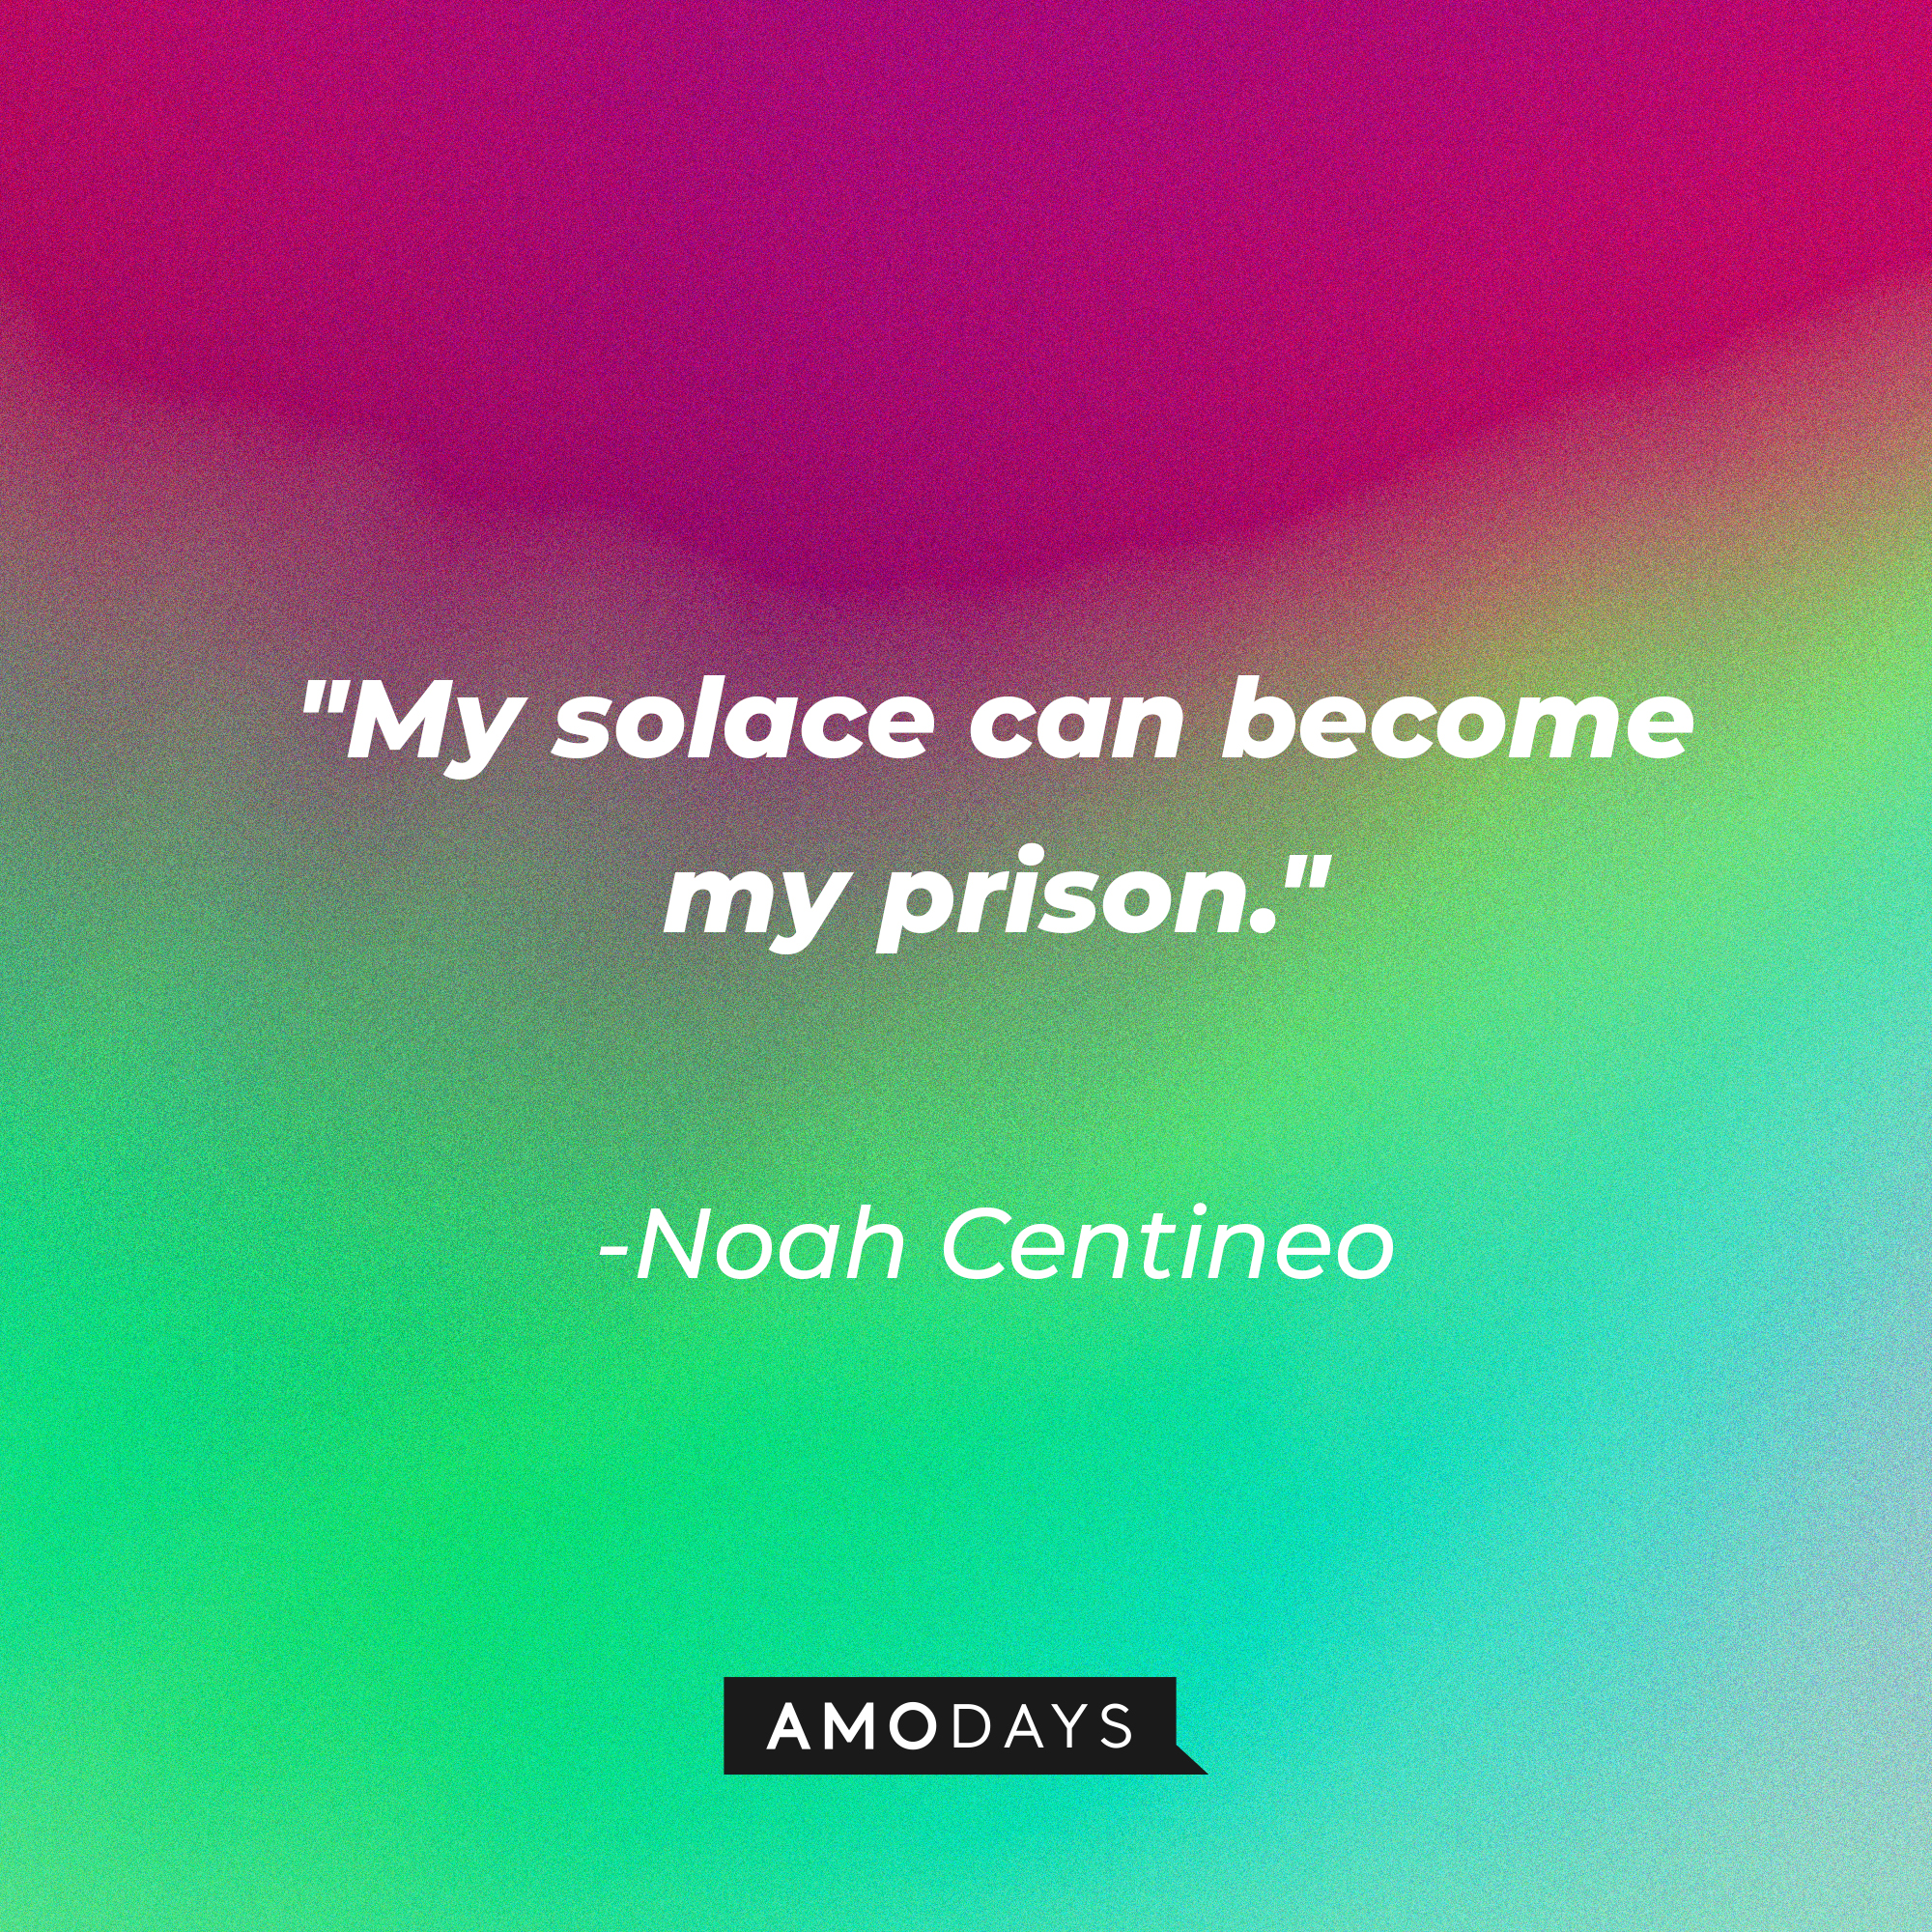 Noah Centineo's quote: "My solace can become my prison." | Image: AmoDays